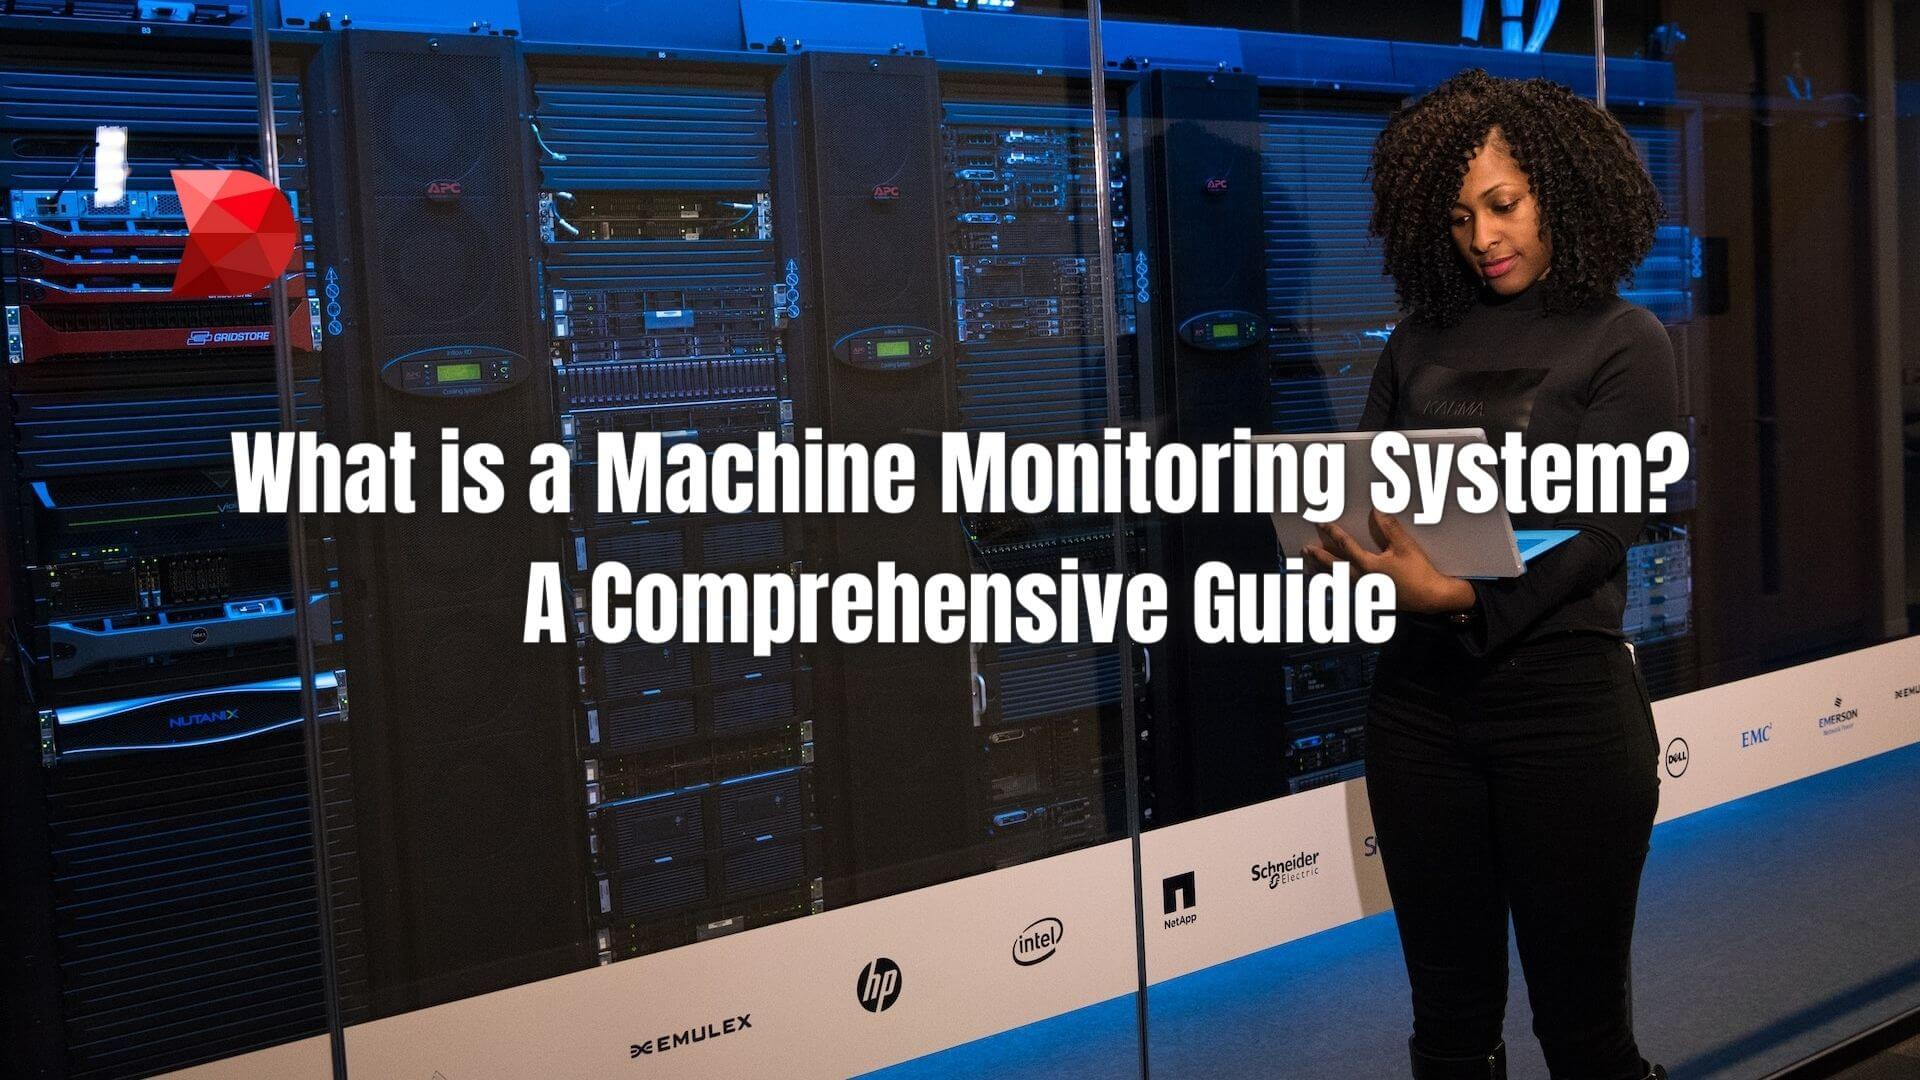 Machine monitoring is a system that involves the continuous observation of a machine to learn about its performance. Read here to learn more!